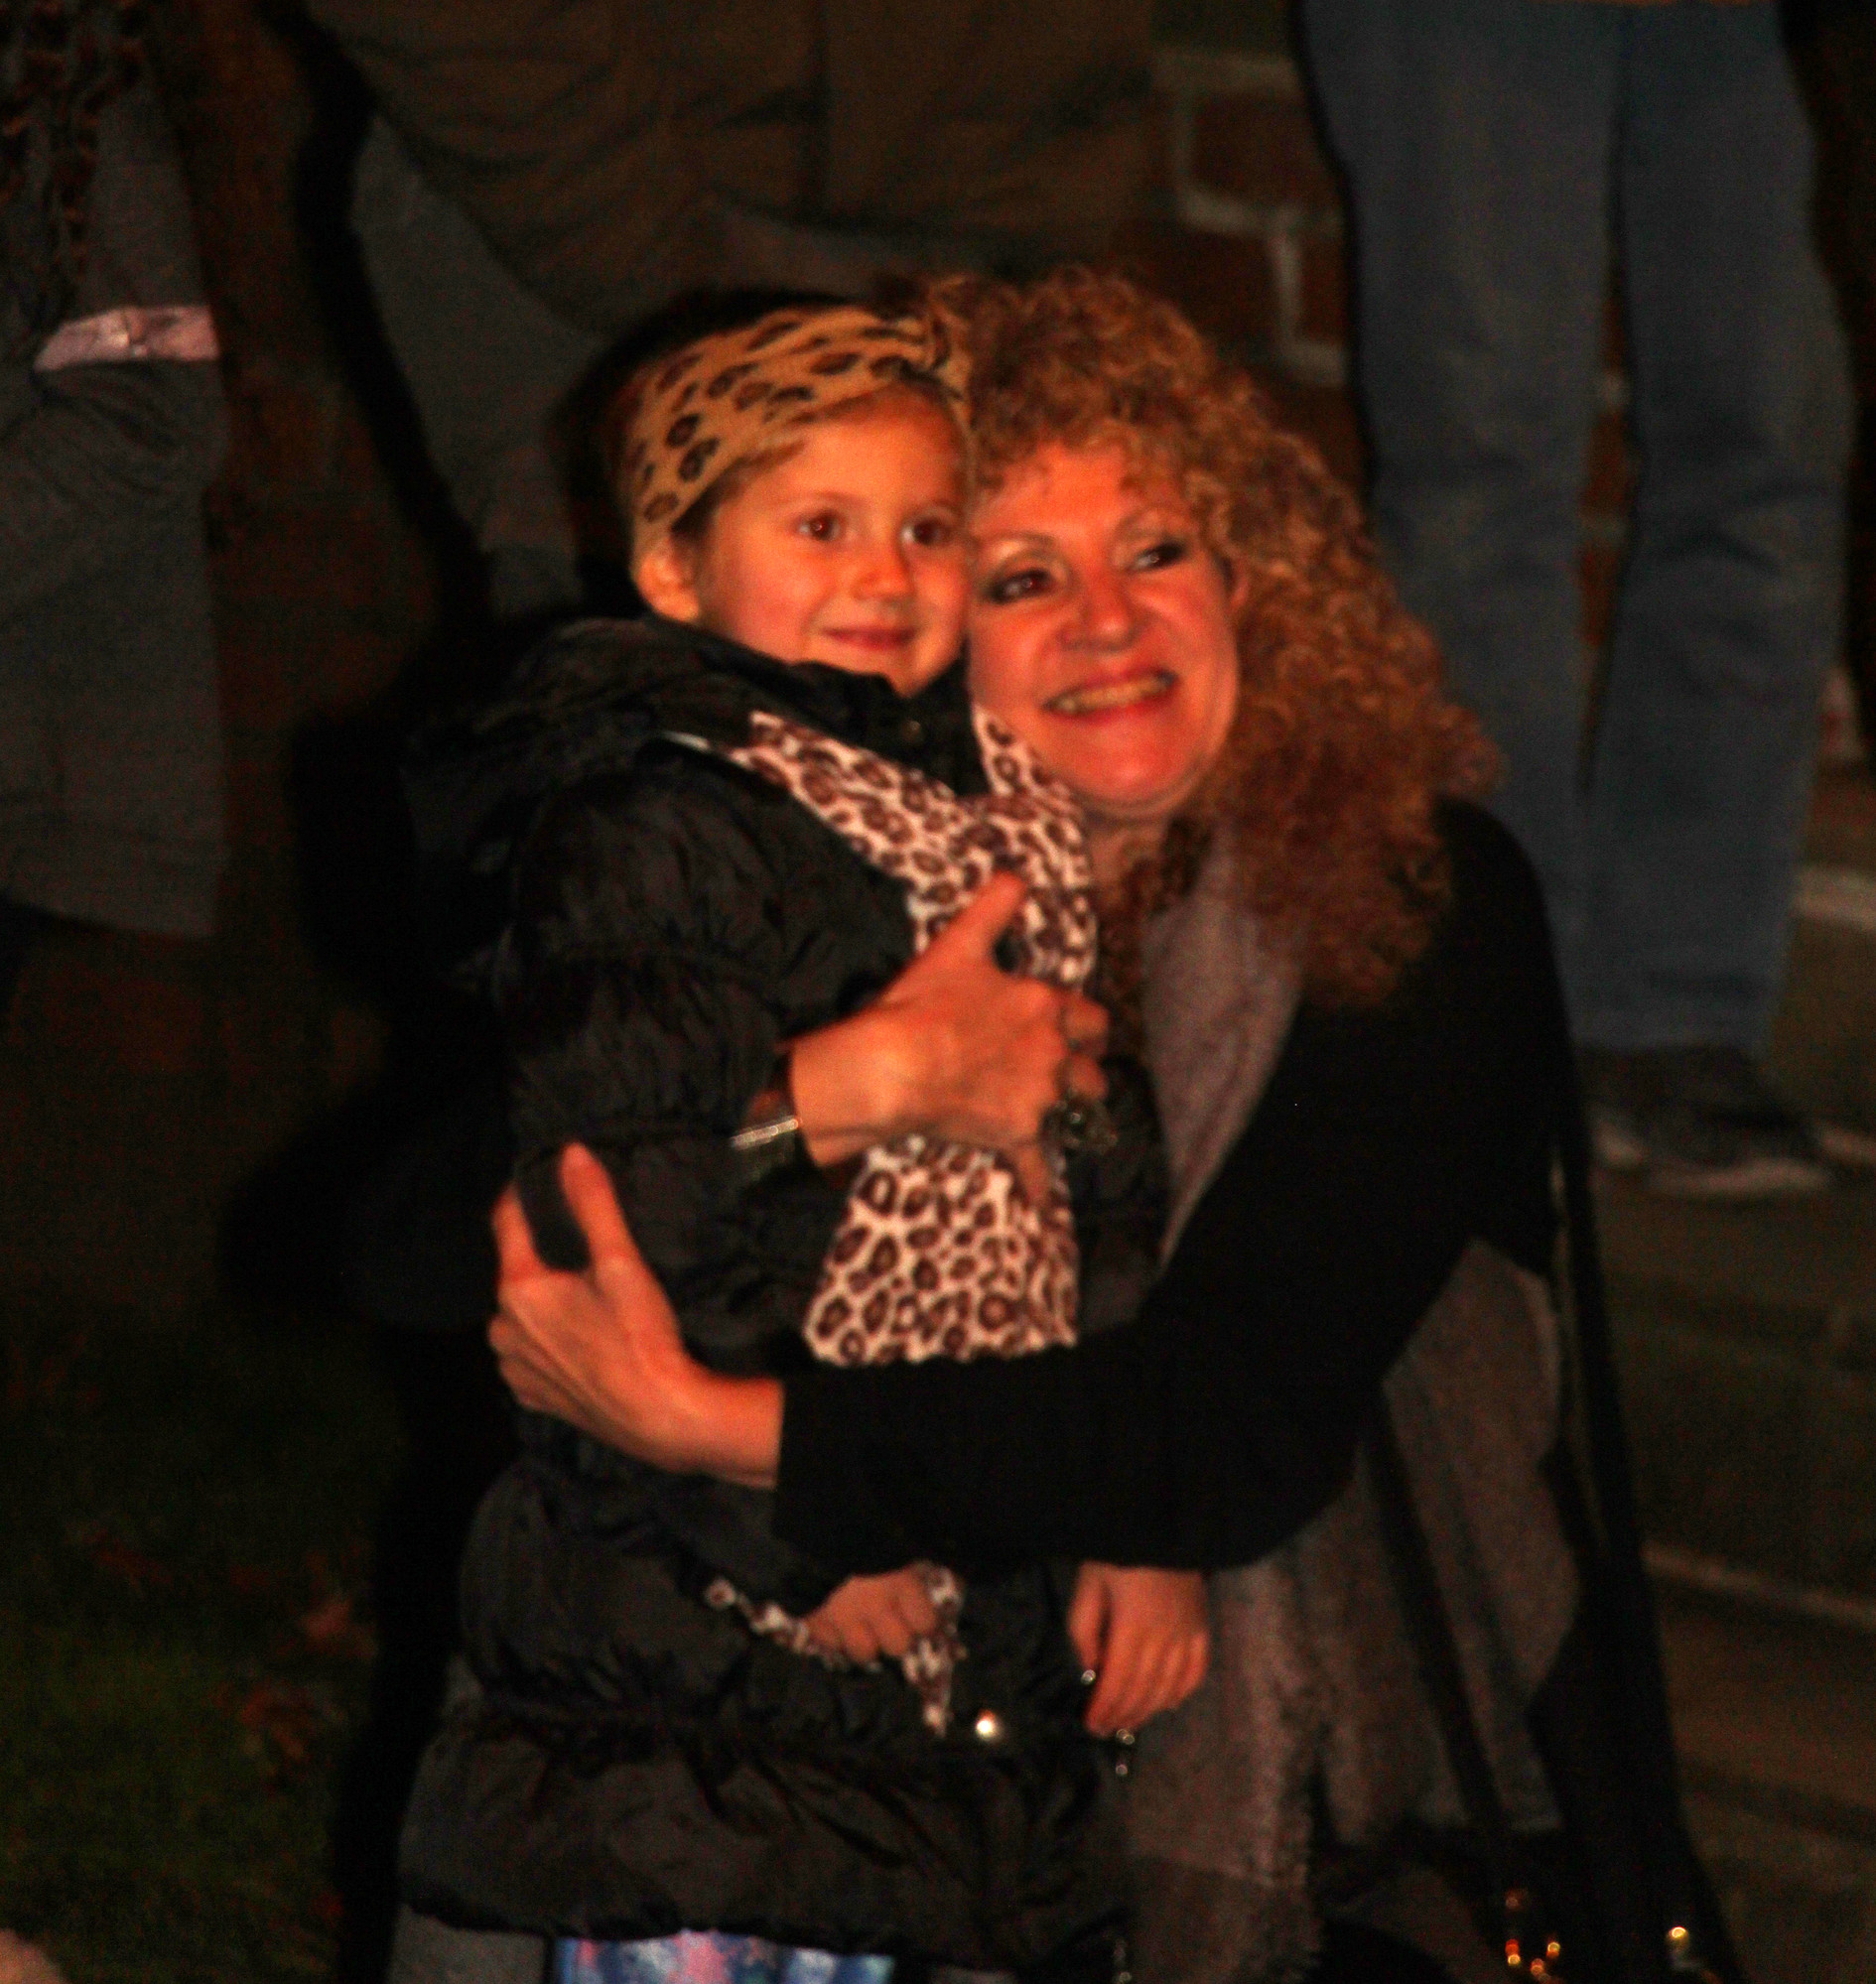 Avery Blomberg, 4, snuggled, sang and swayed with her Nana, Wendy Lepkoff, to holiday songs.